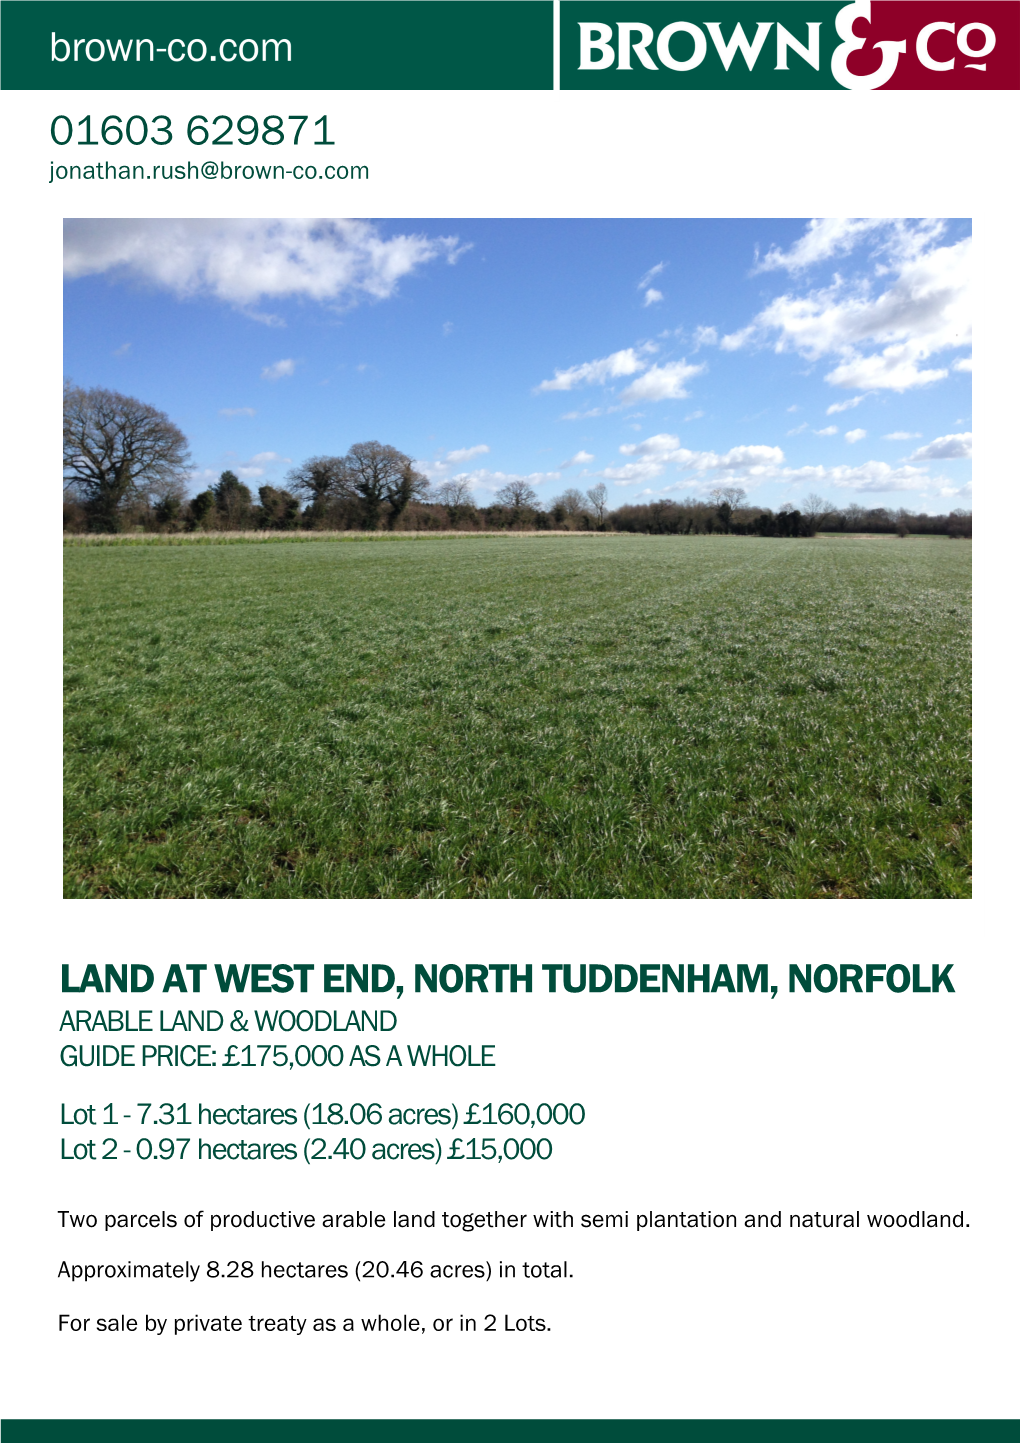 Land at West End, North Tuddenham, Norfolk Arable Land & Woodland Guide Price: £175,000 As a Whole